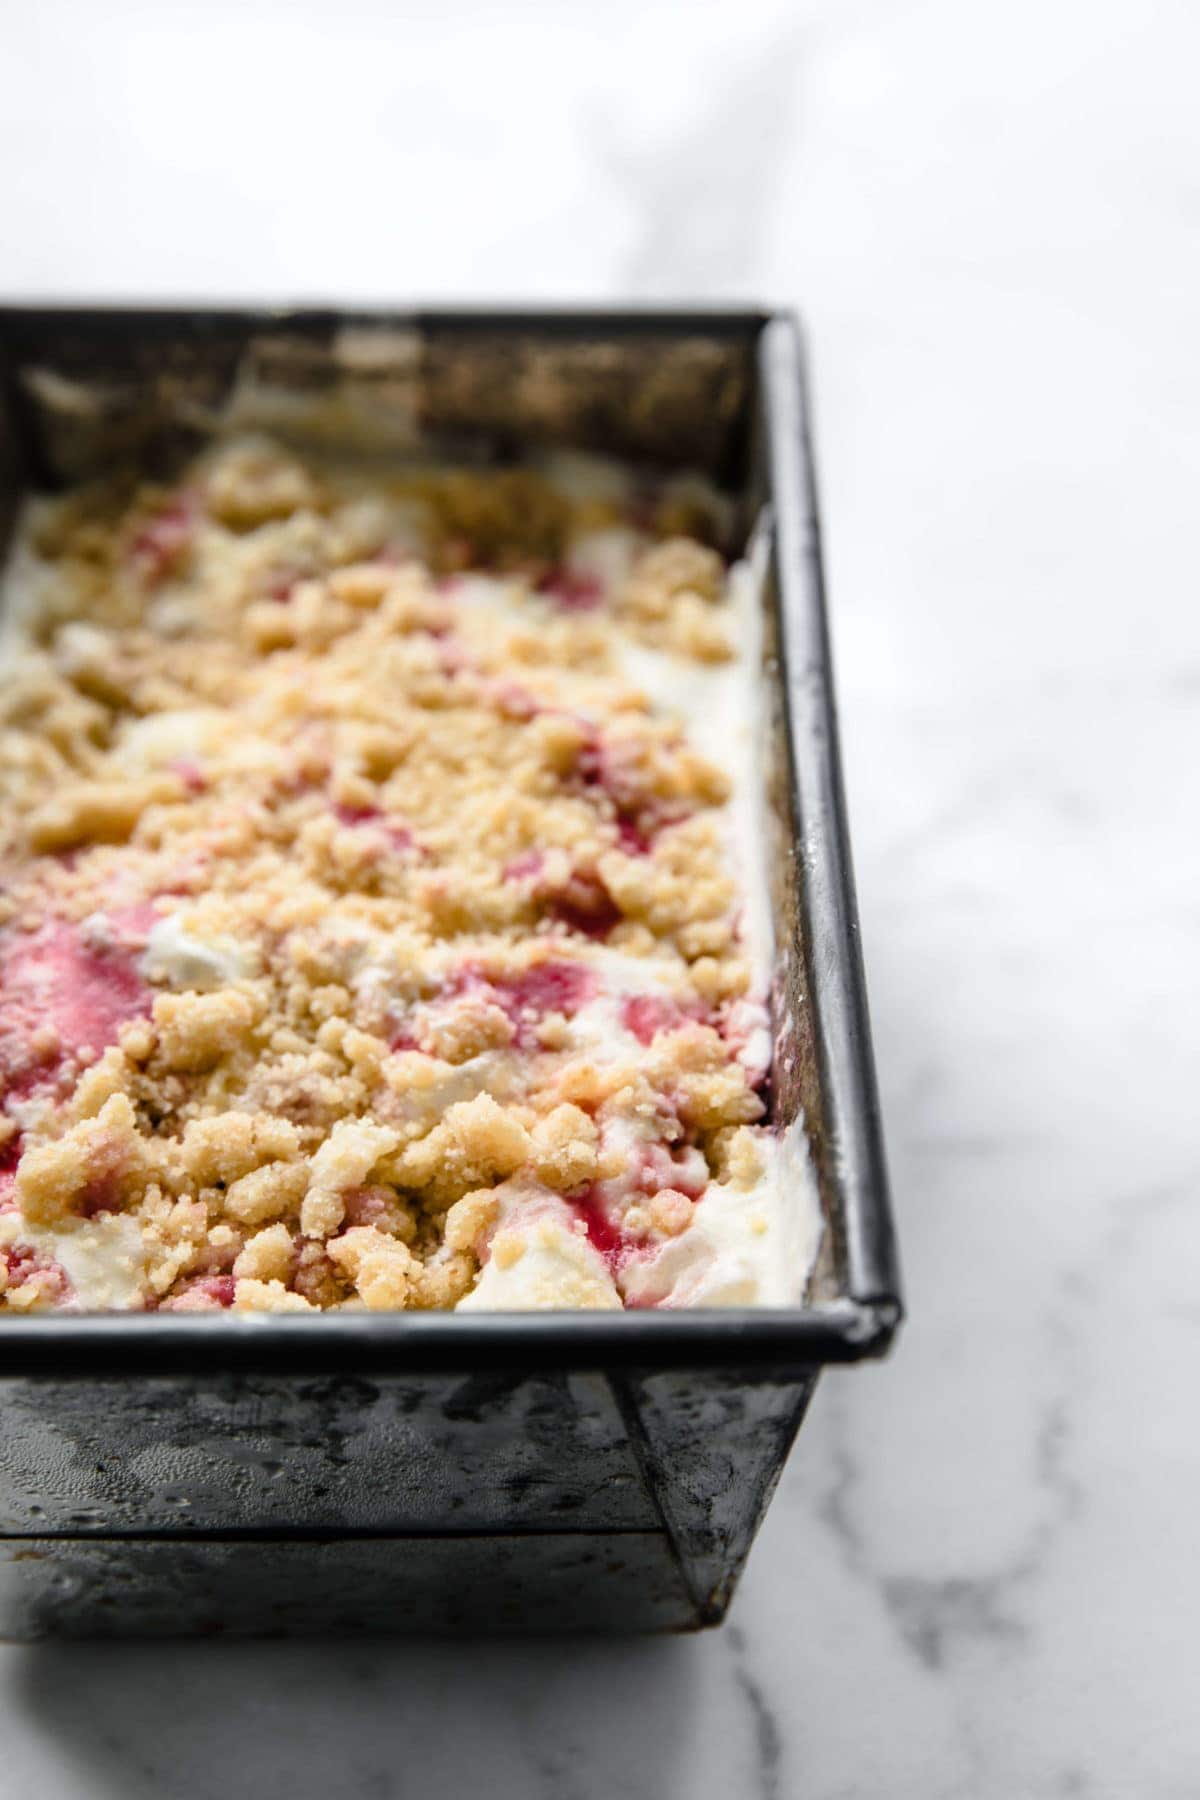 a vintage loaf pan full of homemade ice cream with strawberry sauce and a gluten free crumble on top.